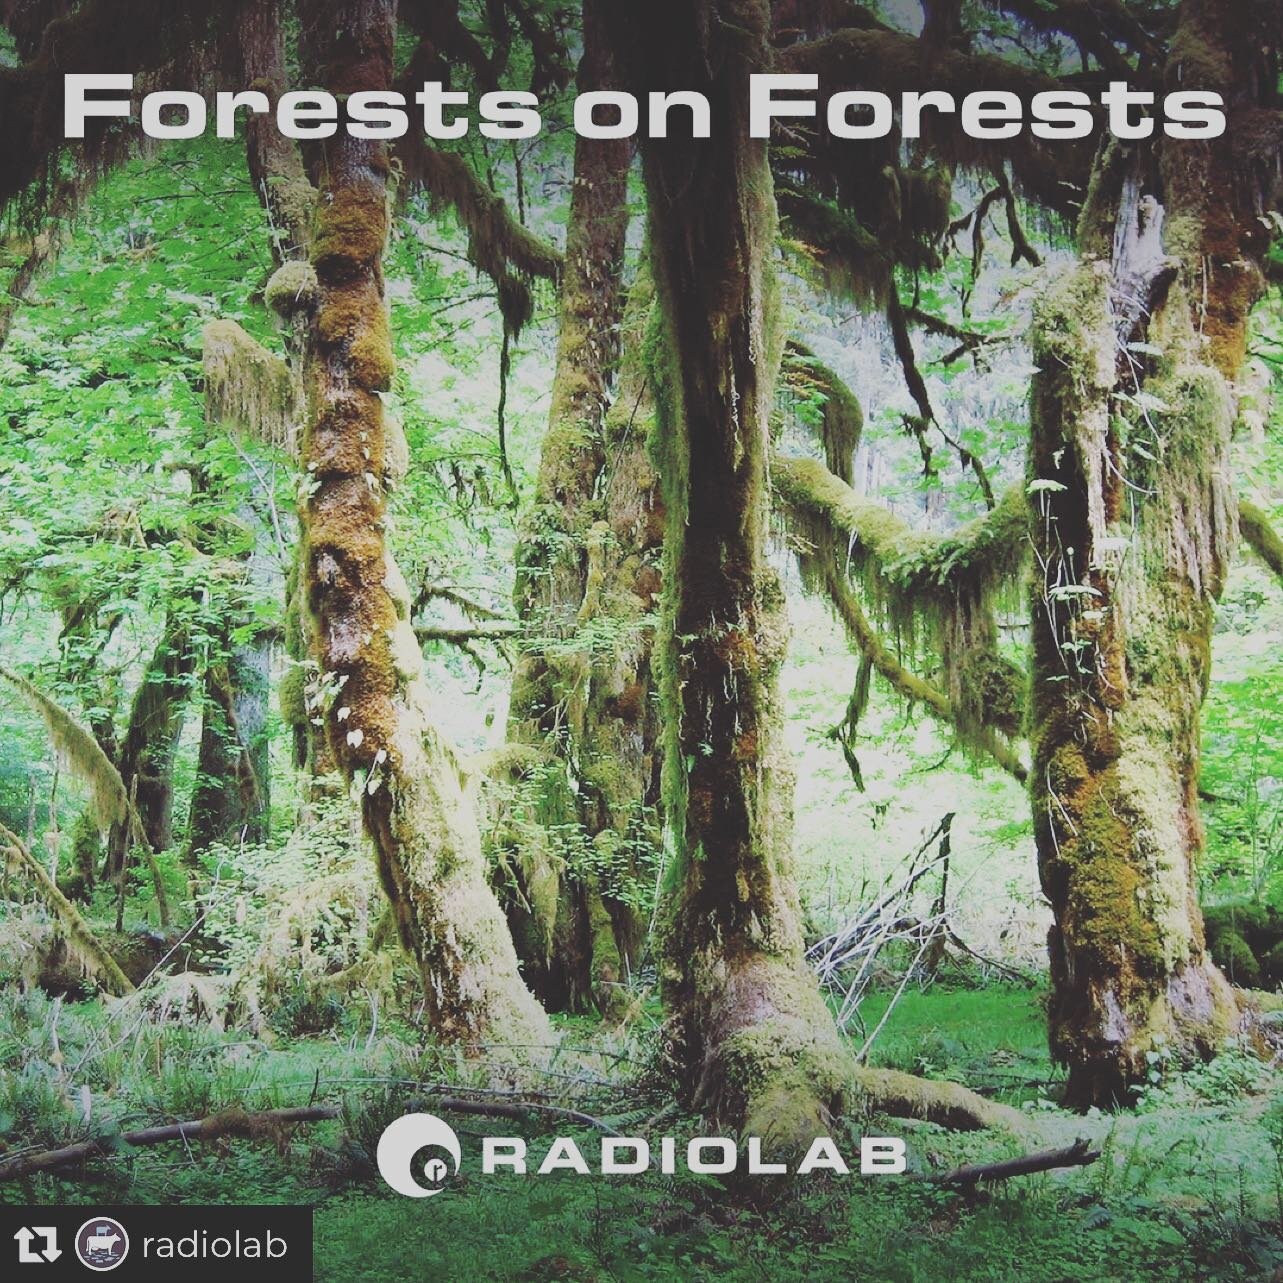 Repost from @radiolab
&bull;
Those crazy root and fungal networks that run through the forests of the world? They&rsquo;re in the treetops too.

Click the link in bio to hear &quot;Forests on Forests.&quot;